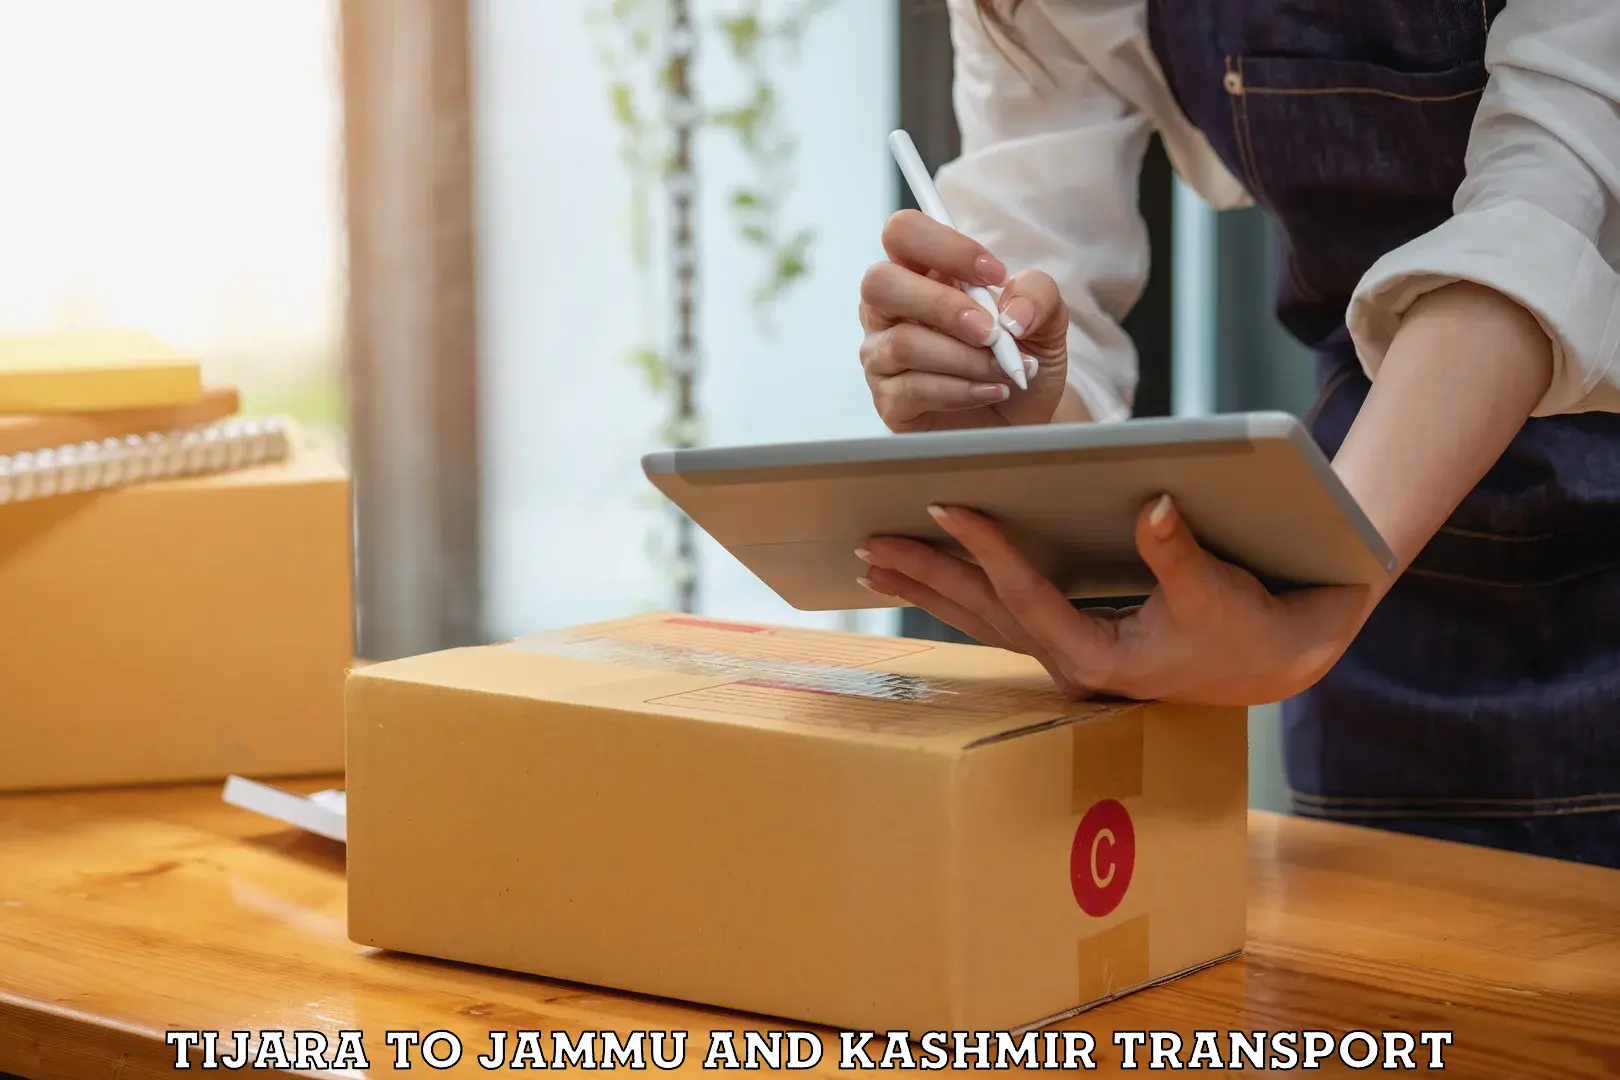 Air freight transport services in Tijara to Baramulla